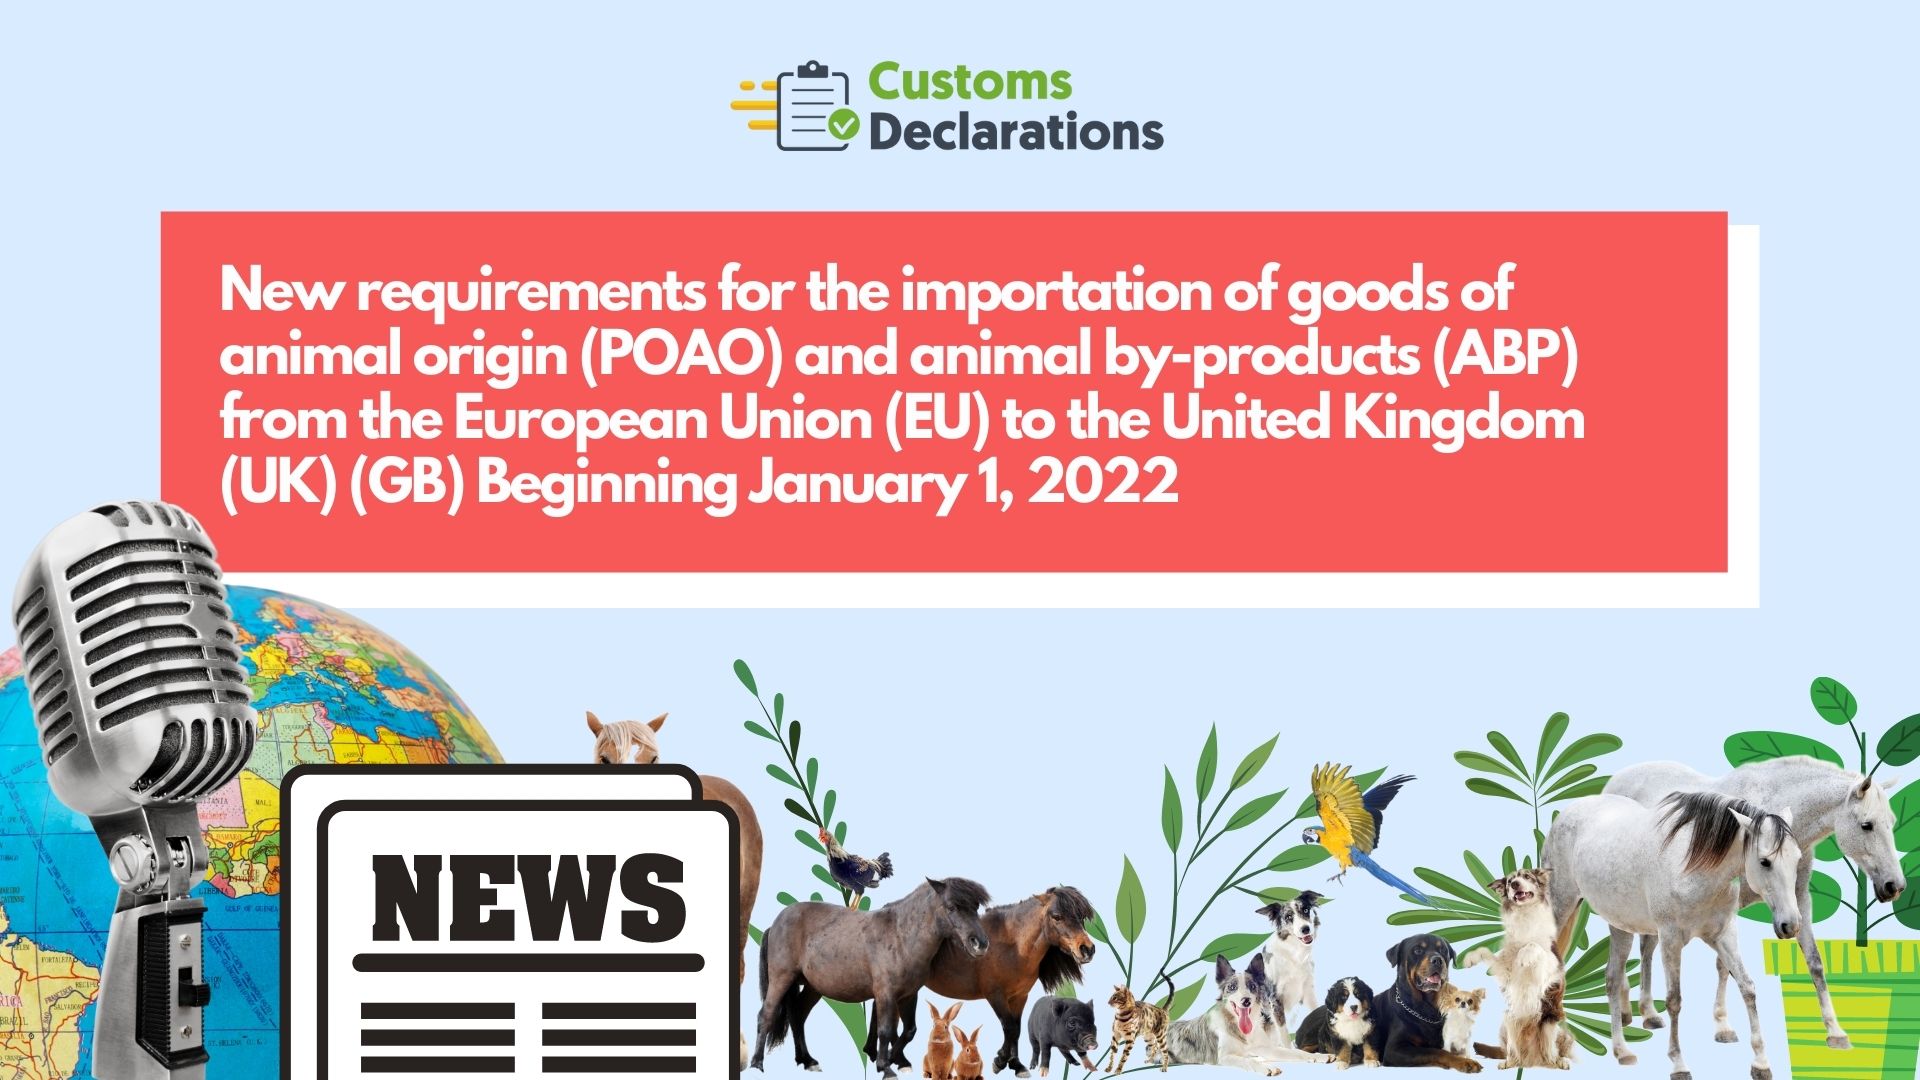 New requirements for the importation of goods of animal origin (POAO) and animal by-products (ABP) from the European Union (EU) to the United Kingdom (UK) (GB) Beginning January 1, 2022